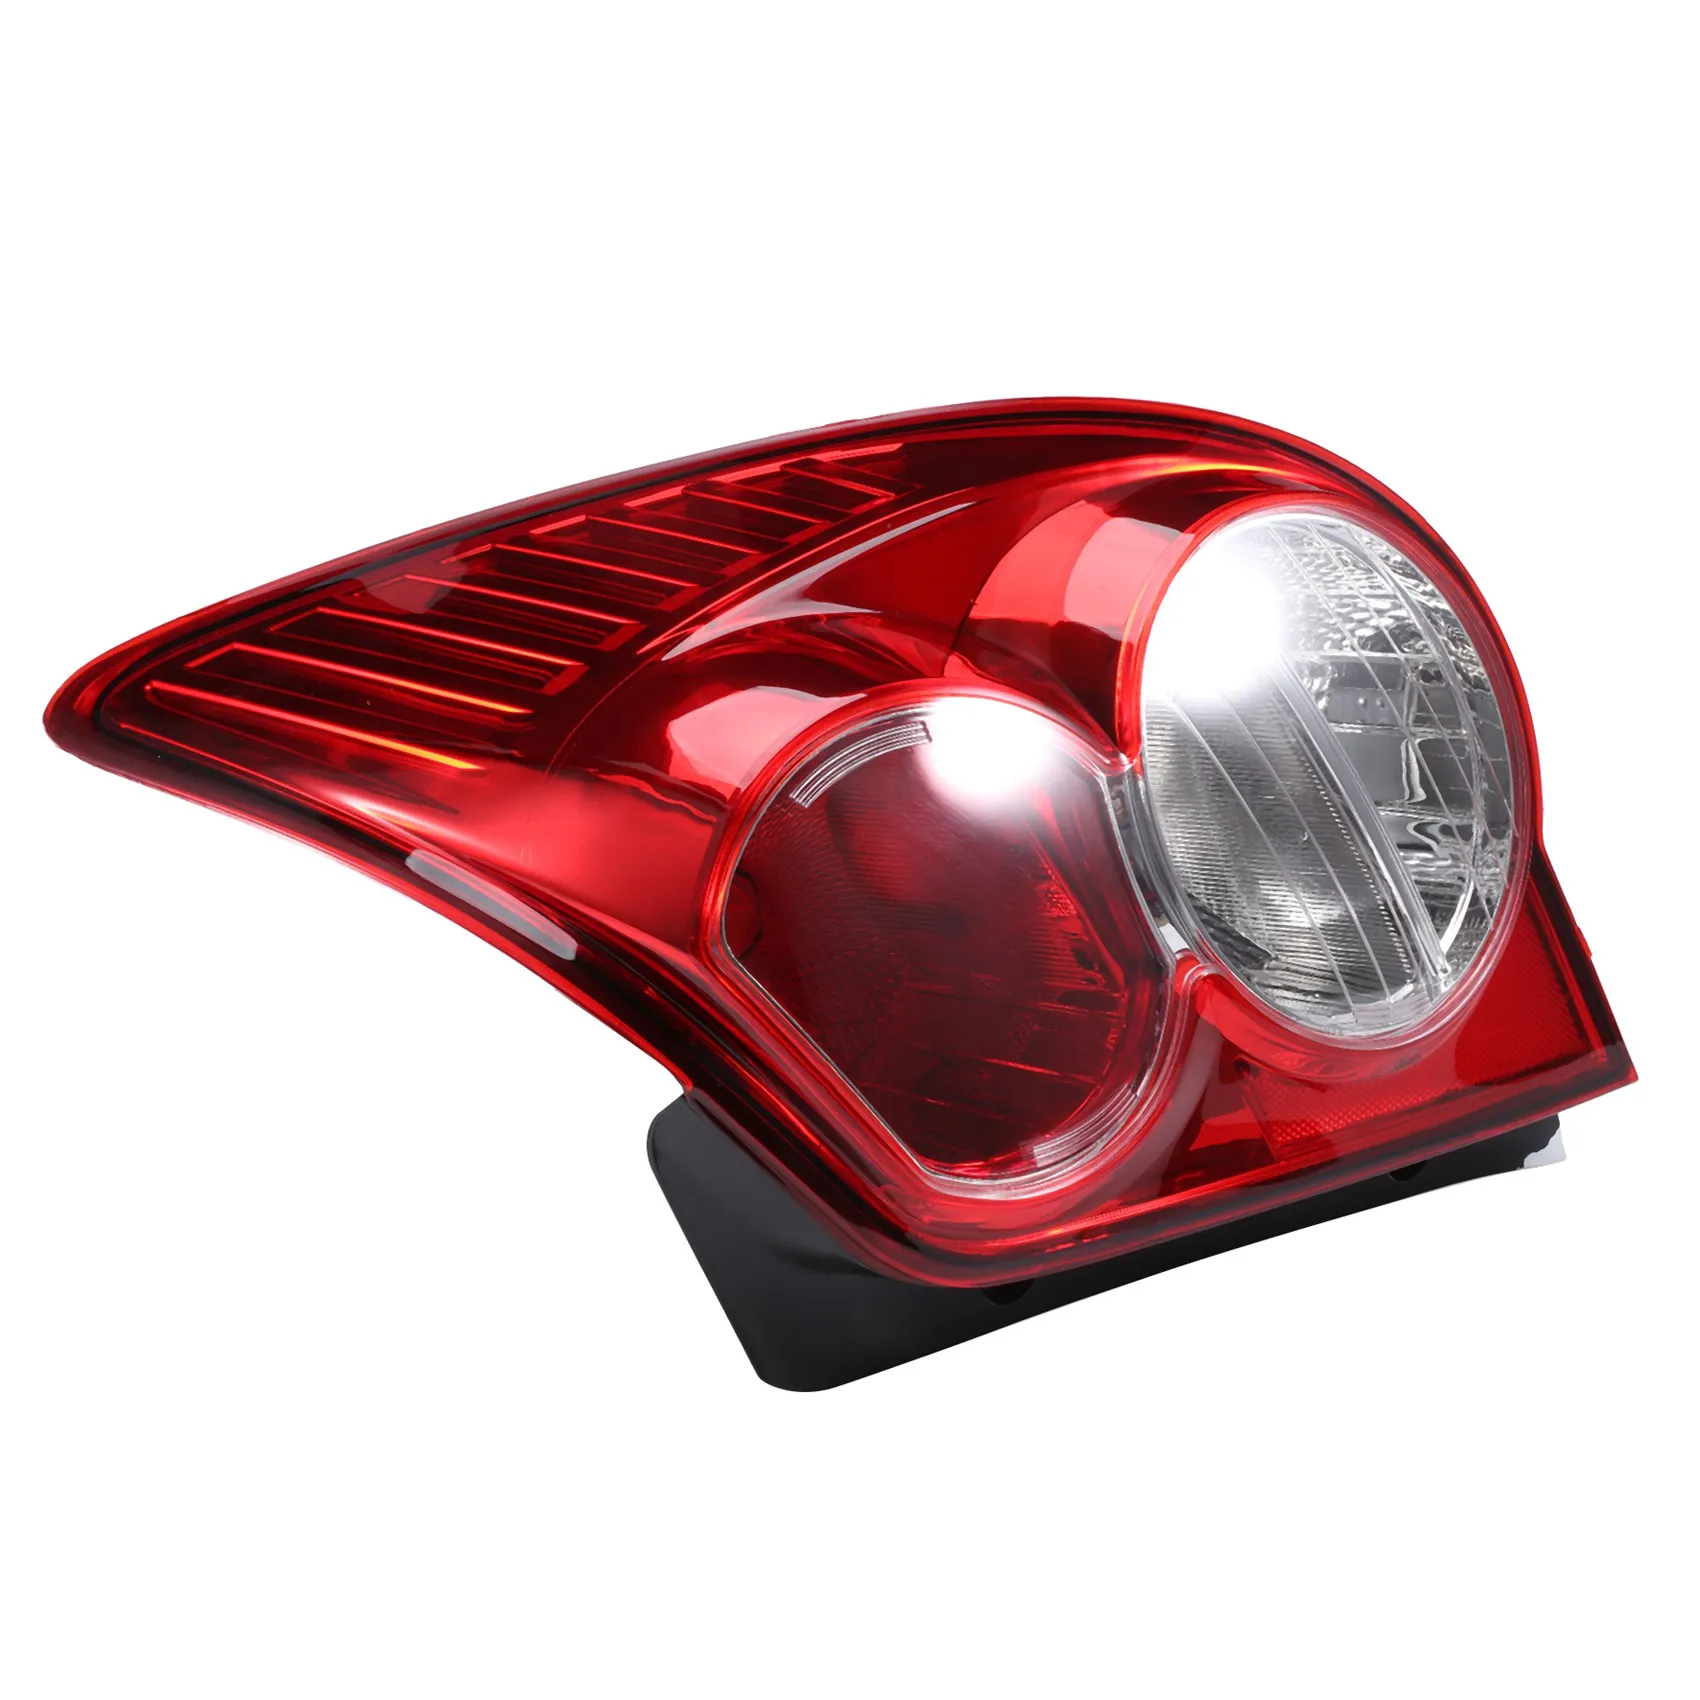 

Car Right Rear Bumper Tail Lamp Driving Stop Brake Light for Chevrolet Chevy Sonic 4D Aveo 4D 2011-2013 96830974